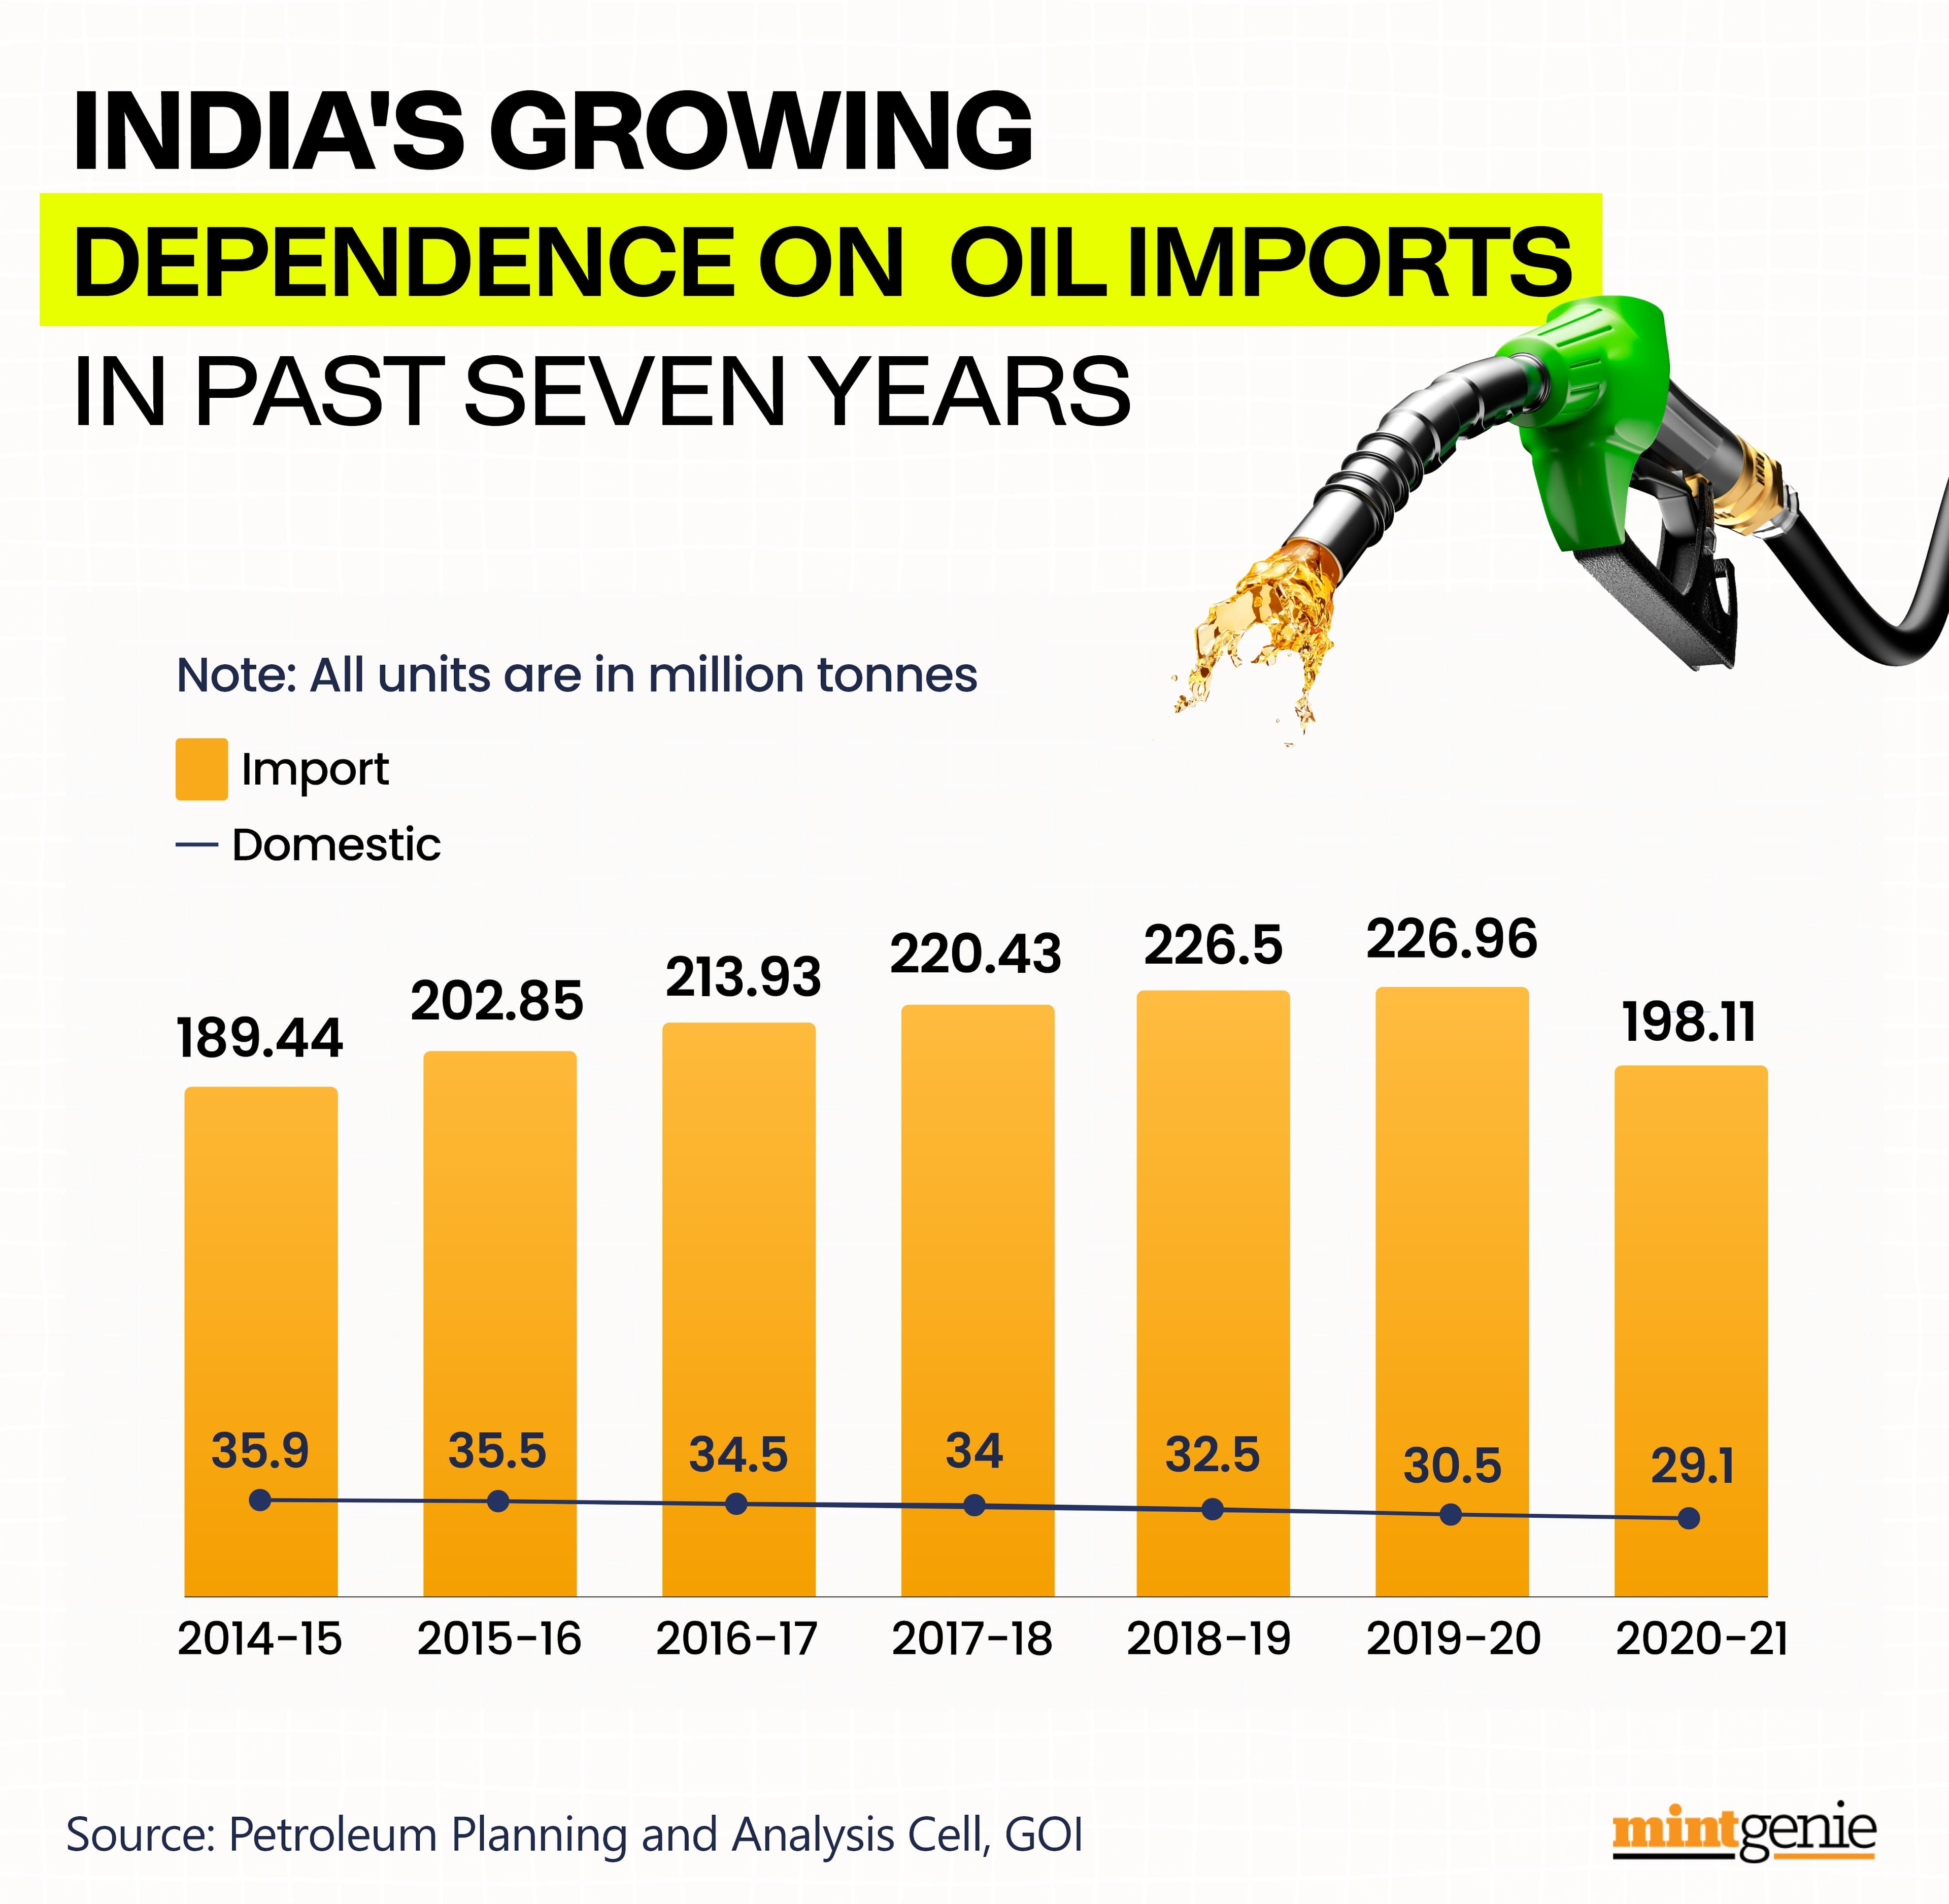 India’s growing dependence on oil imports in past seven years